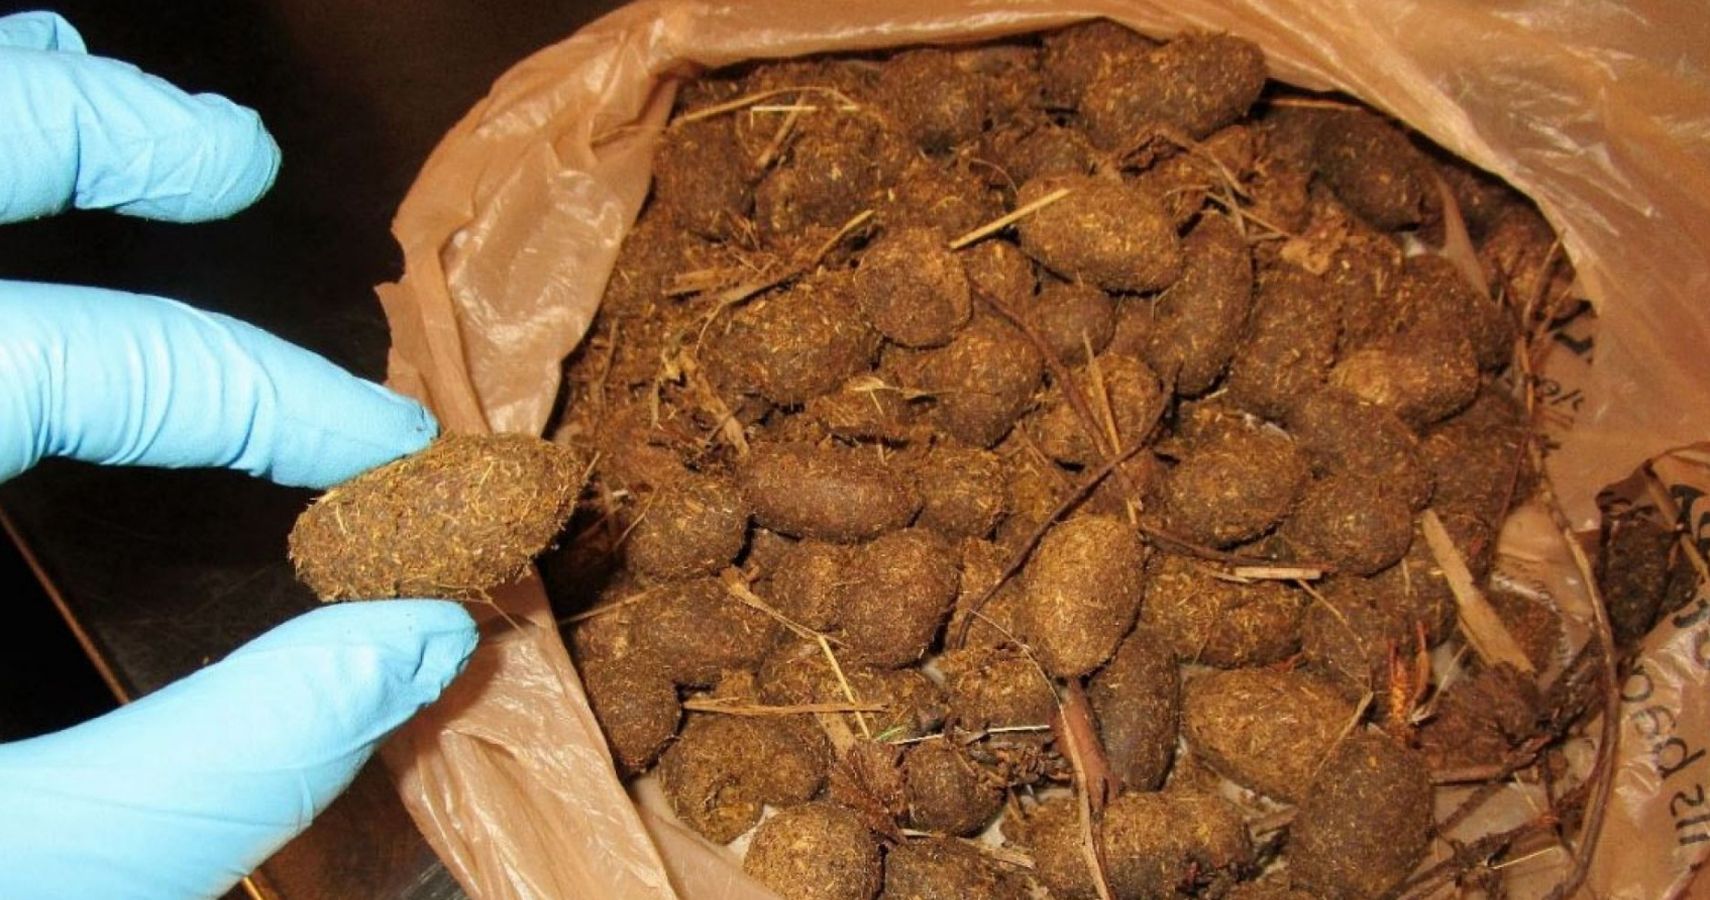 Bag of moose excrement confiscated by TSA in Alaska